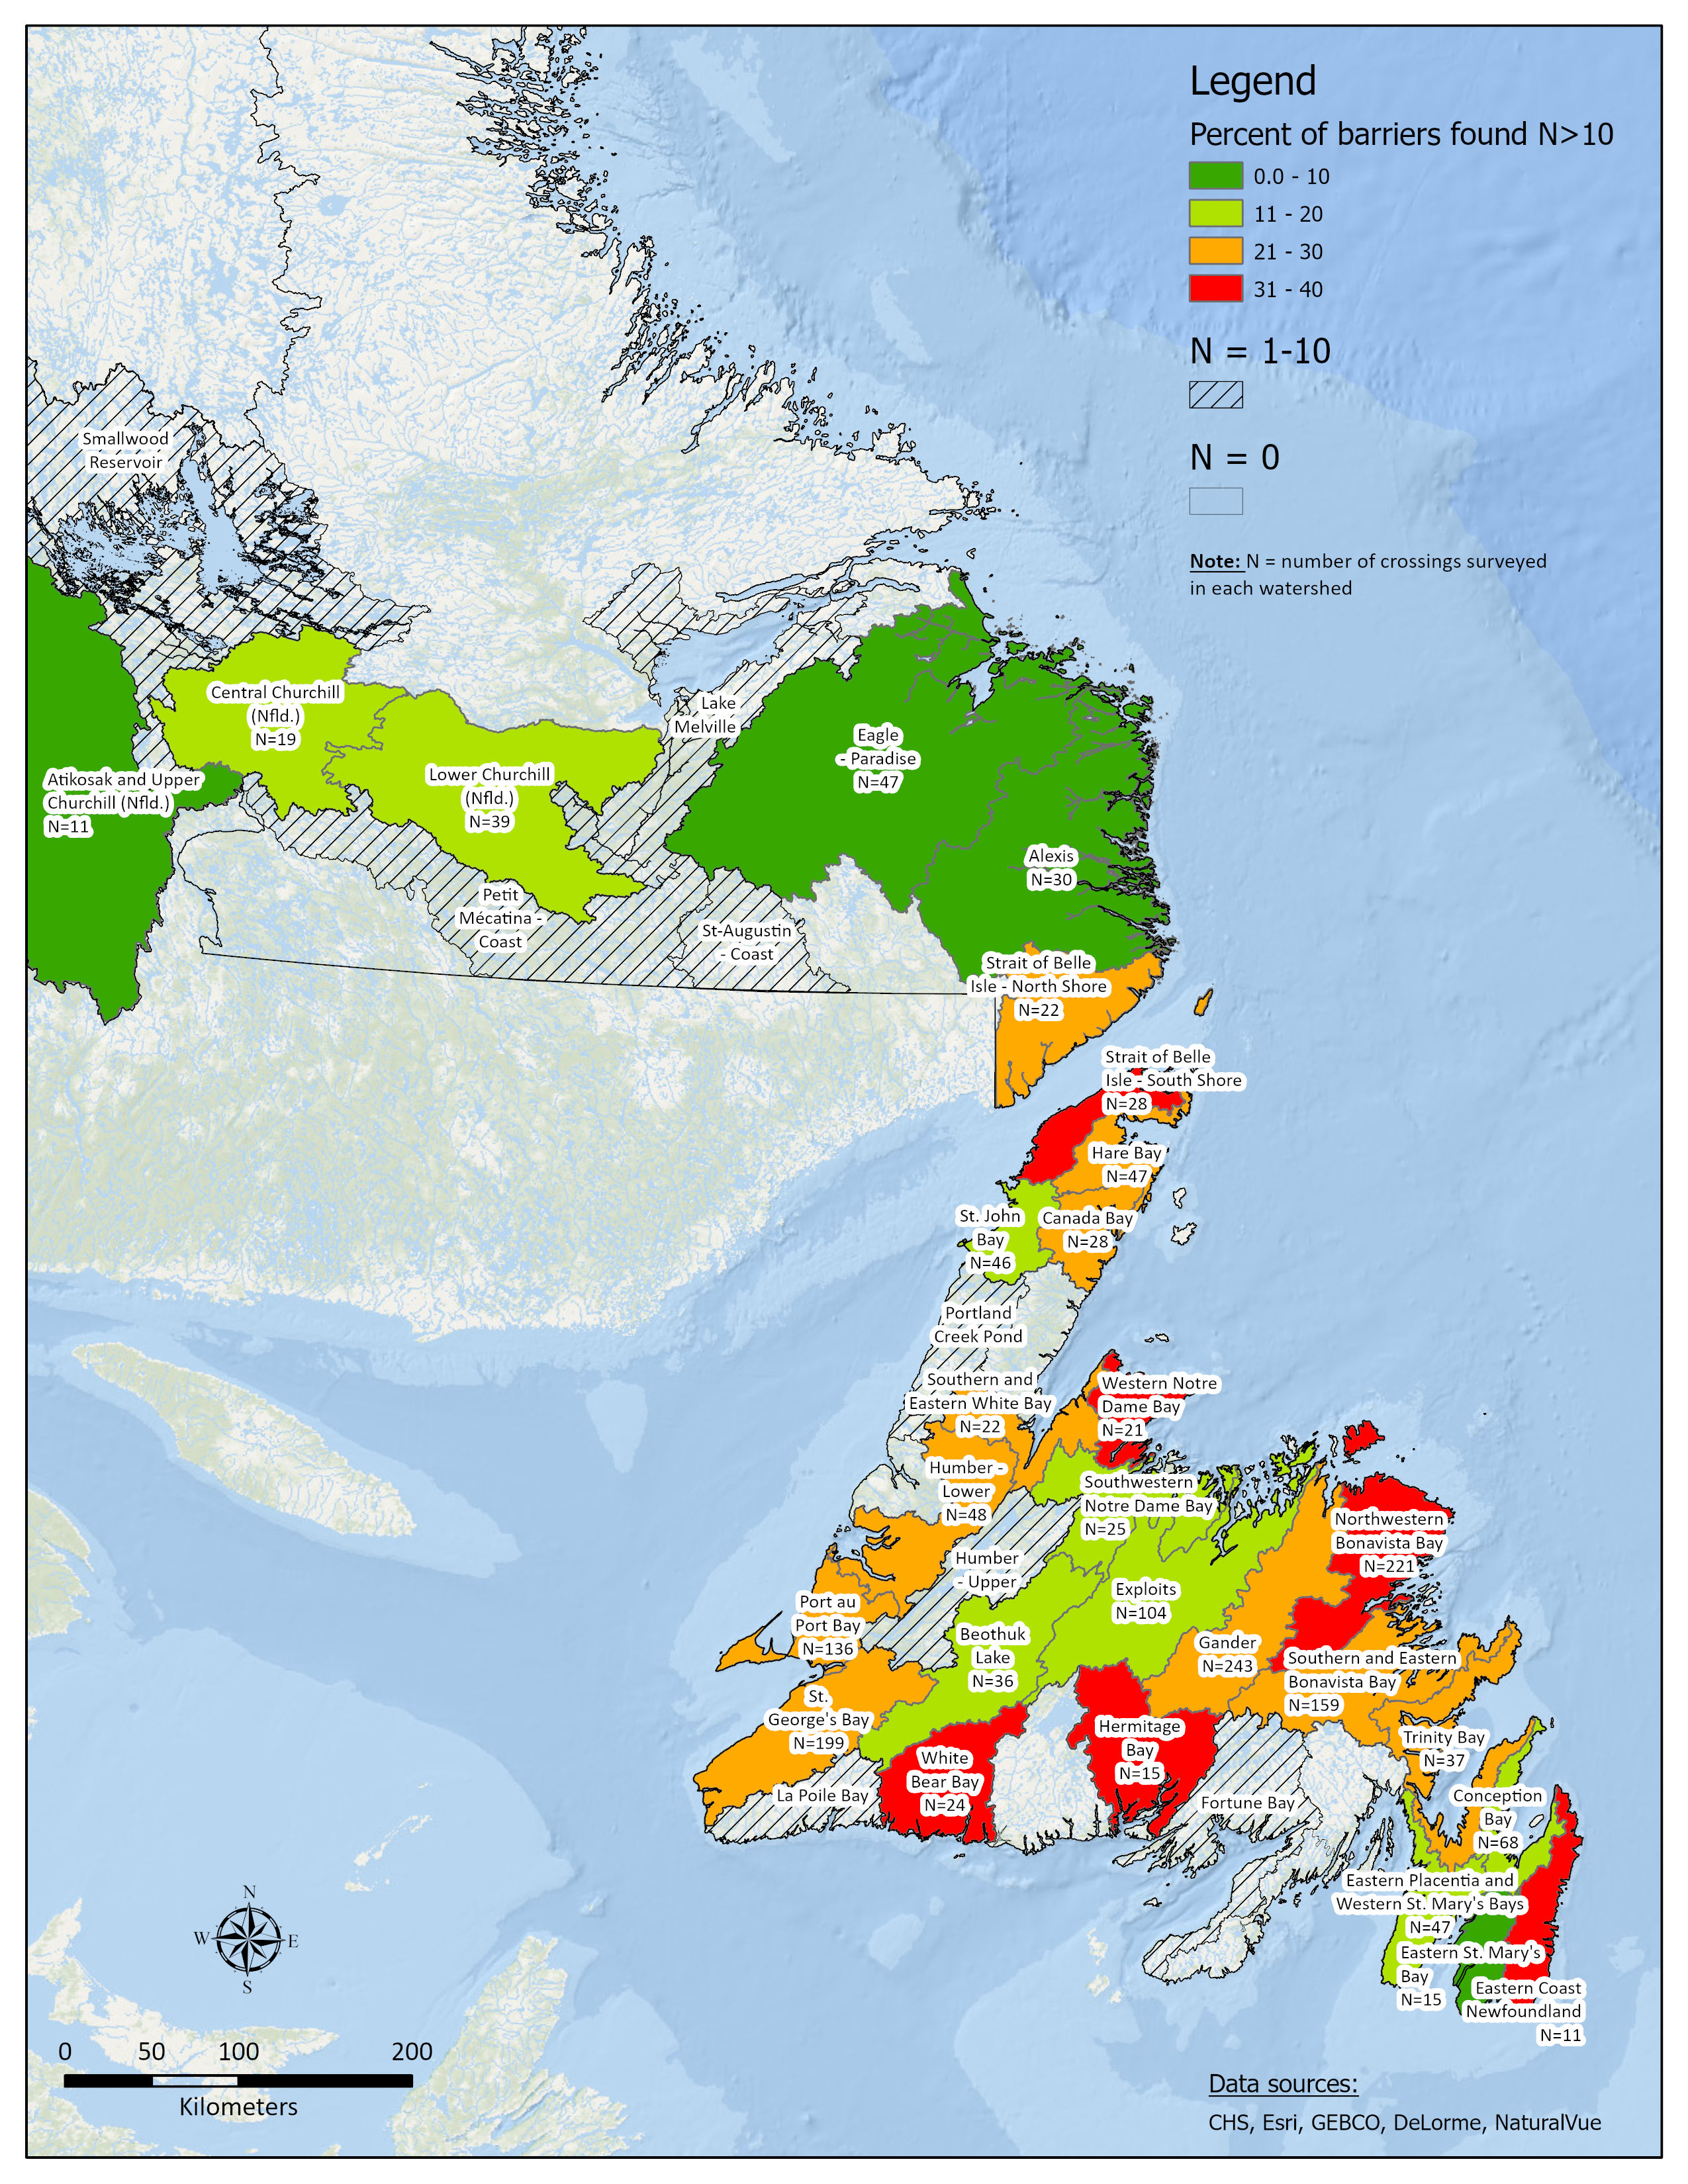 Map showing barrier assessment of crossings for the Island of Newfoundland (e.g. barrier percent and number of surveys), by National Hydrographic Network watershed.